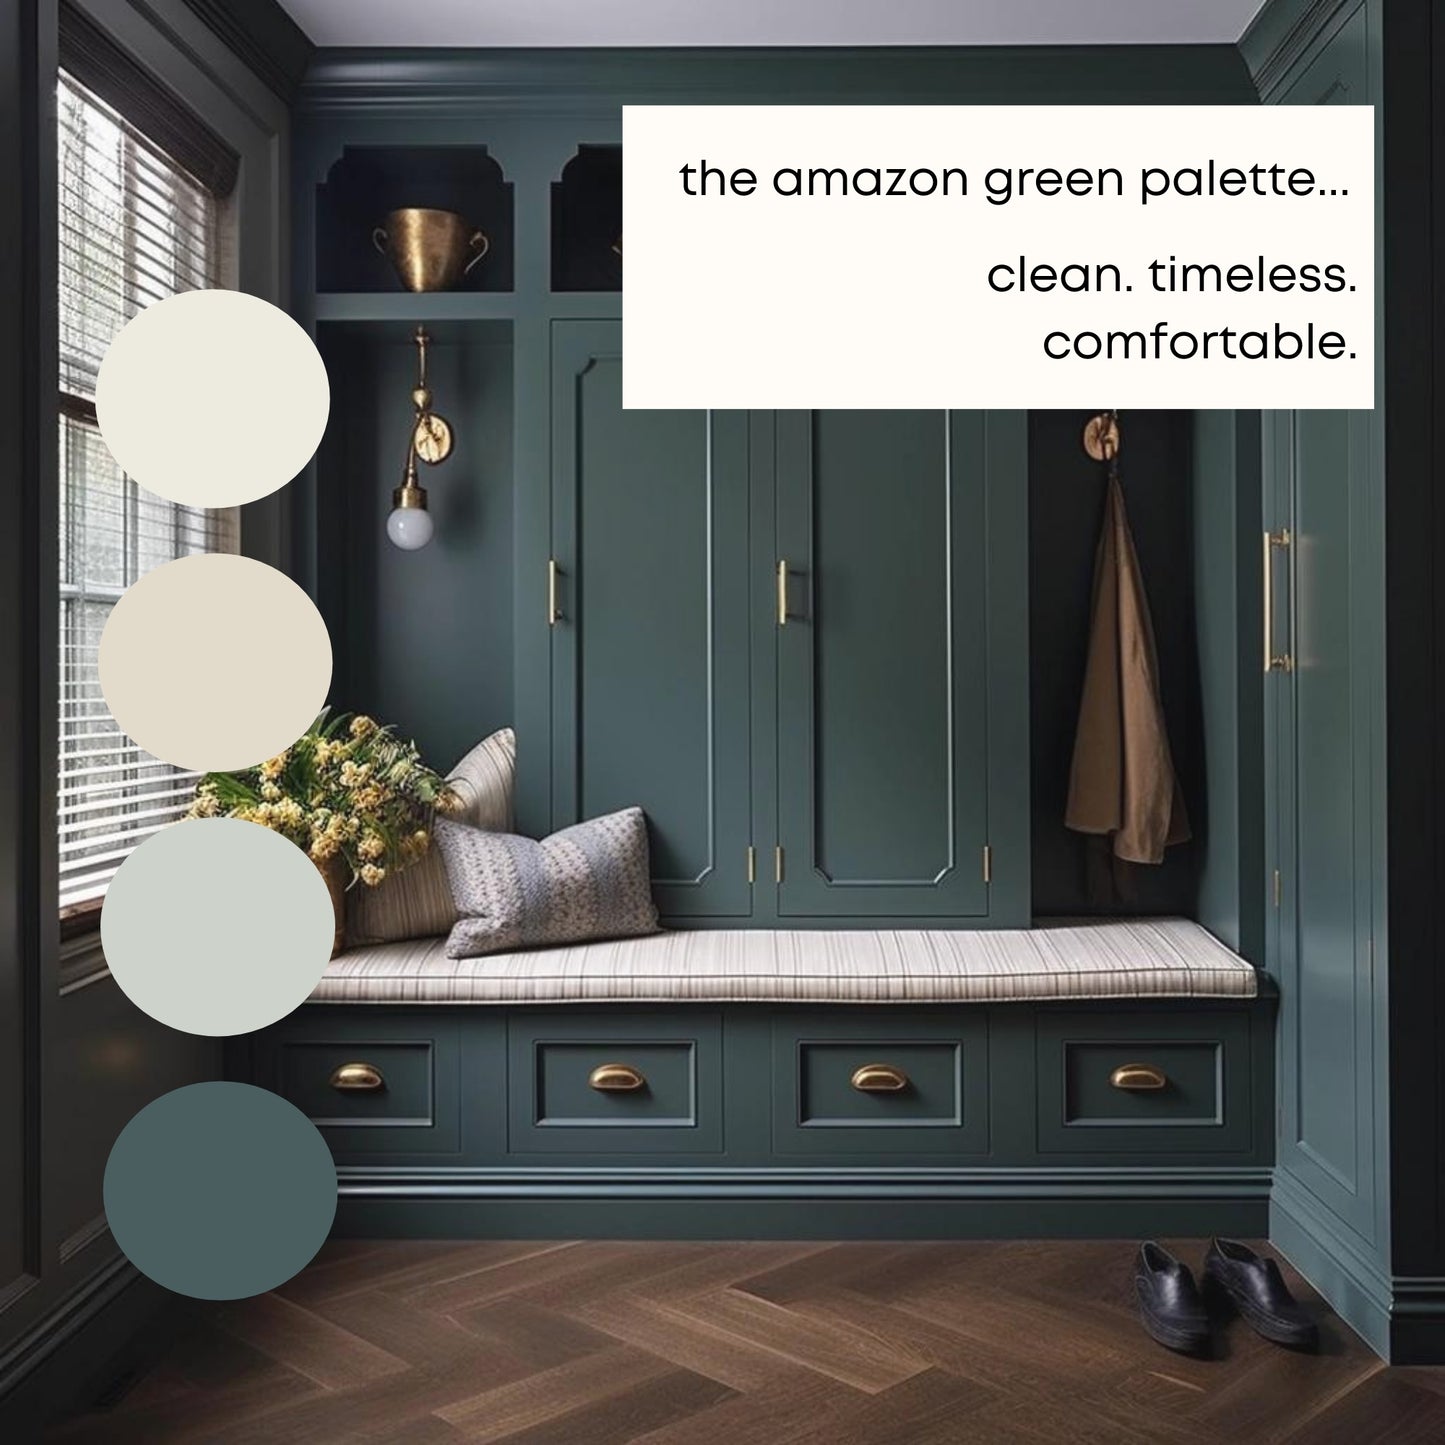 Amazon Green Benjamin Moore Paint Palette - Modern Neutral Interior Paint Colors for Home, Coastal Interior Design Color Palette, Lake House, Benjamin Moore Elmira White